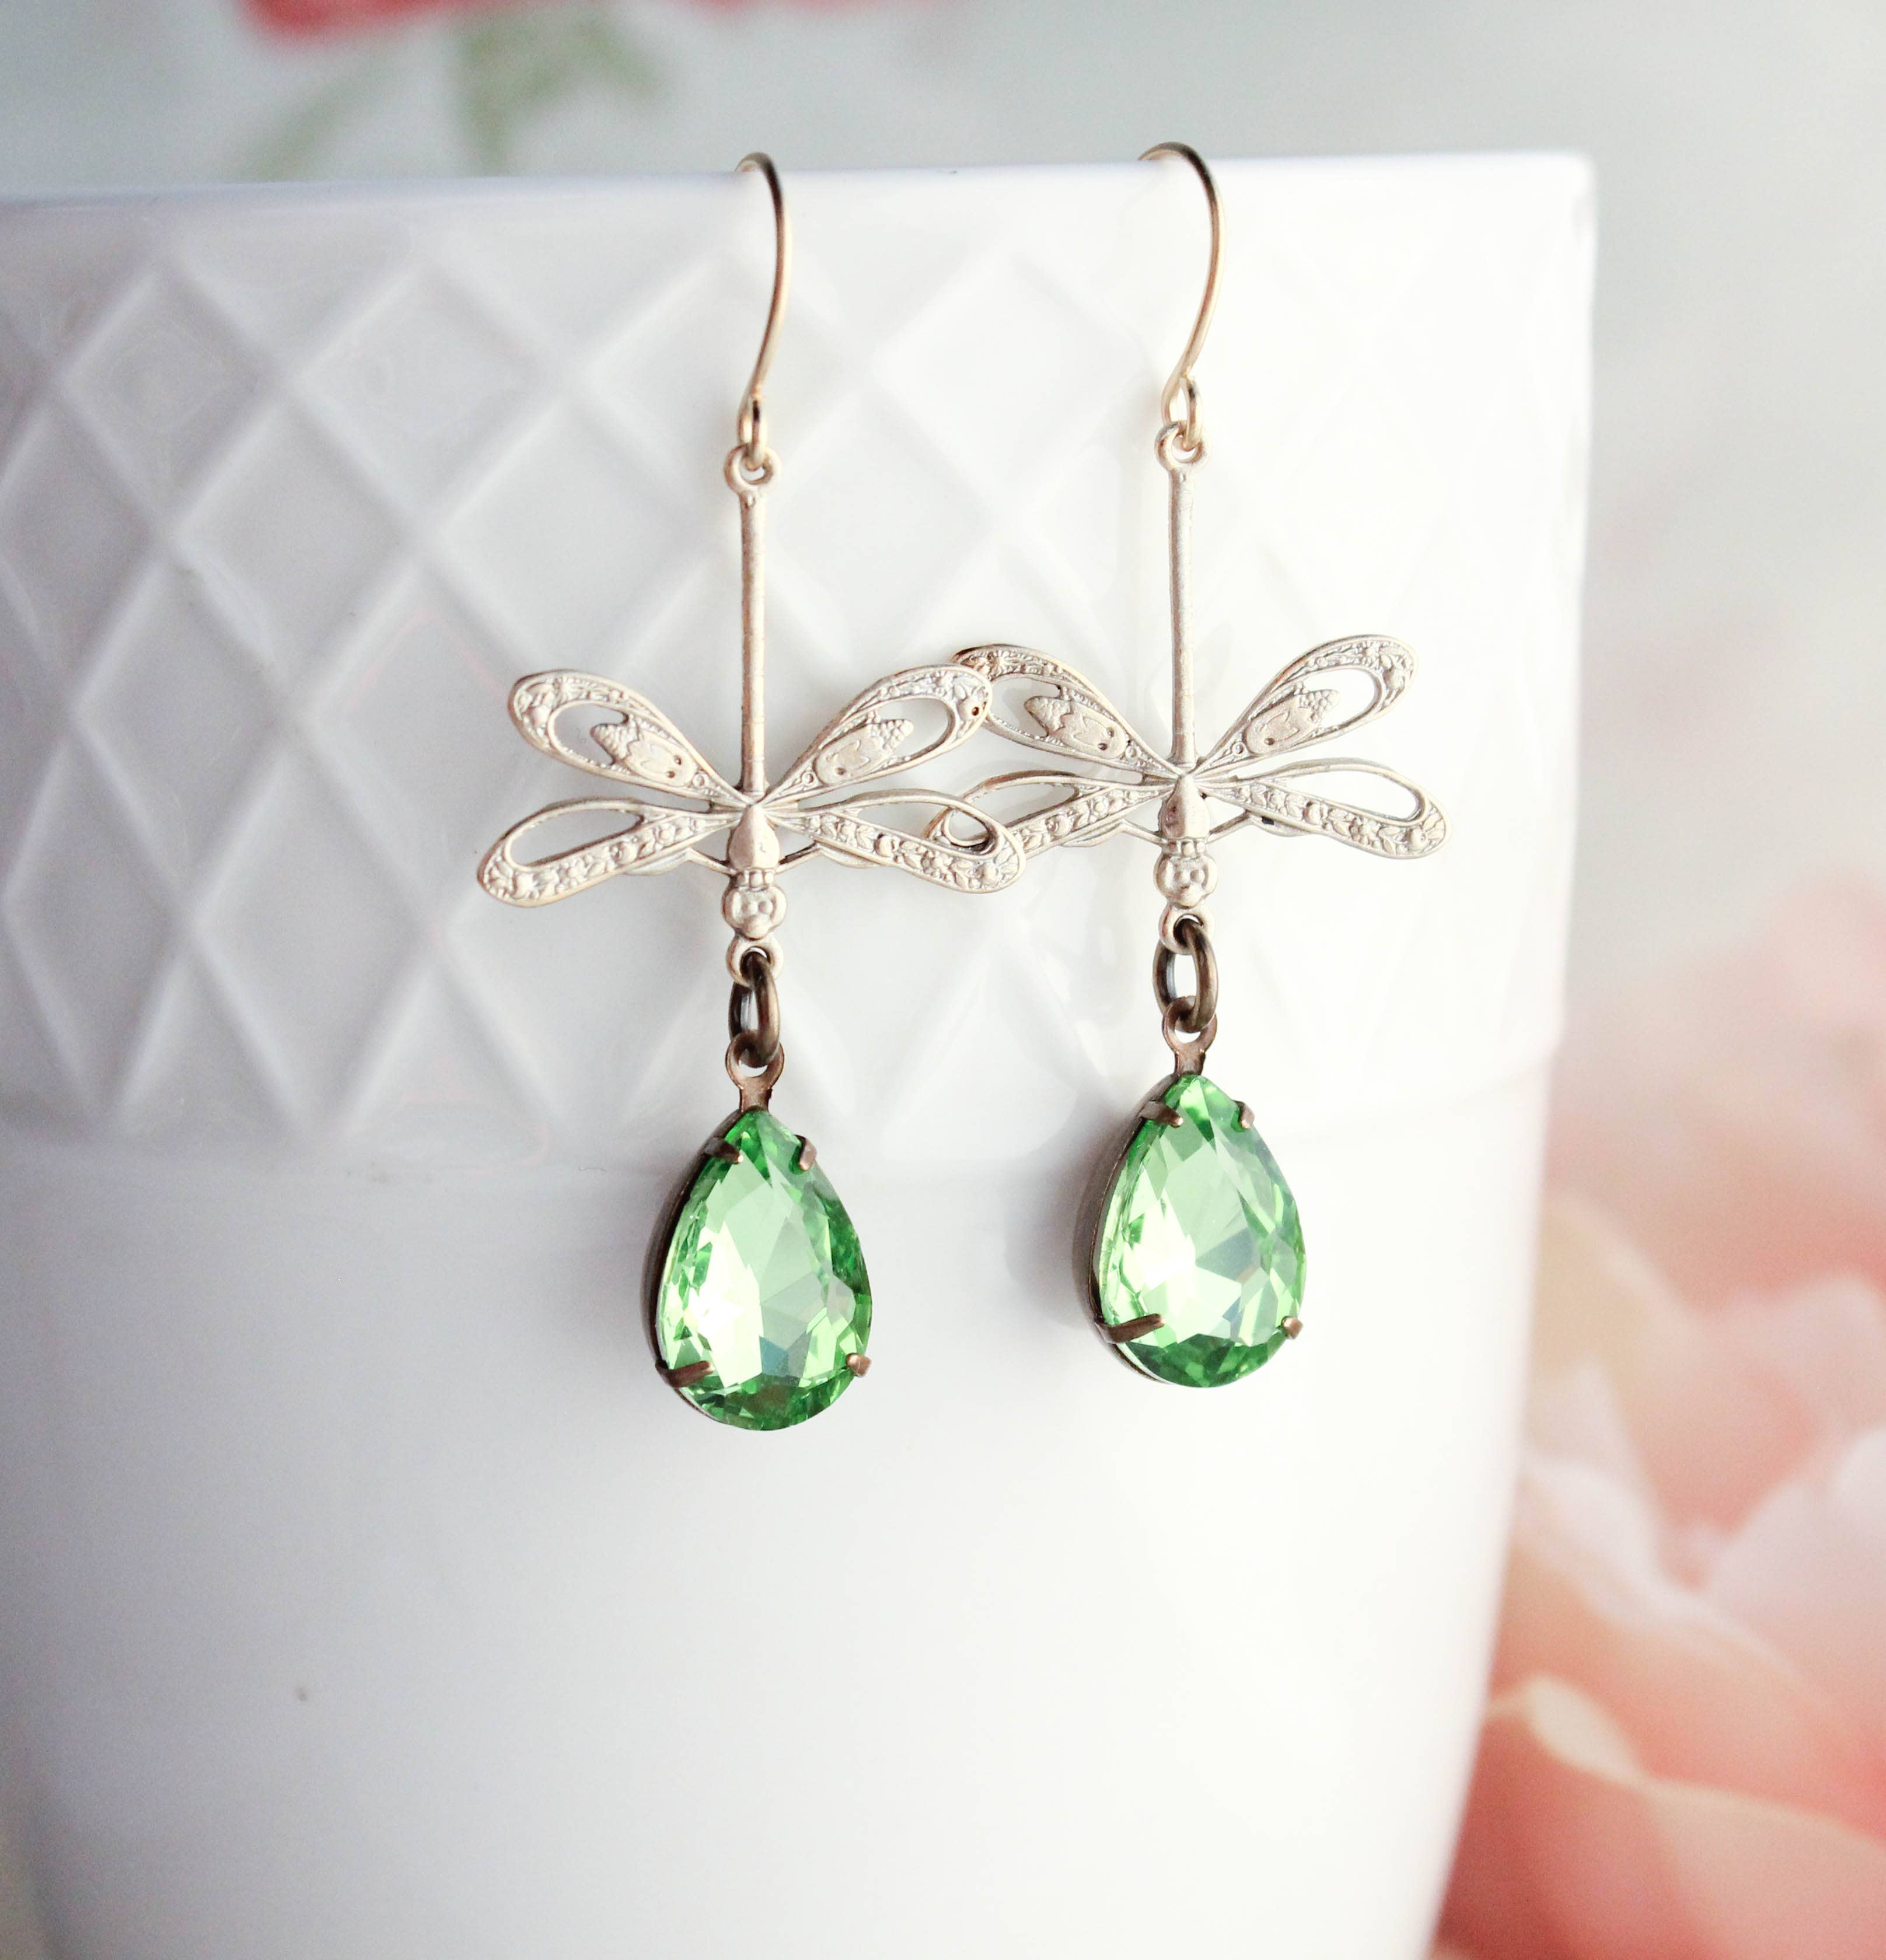 Dragonfly Earrings - Gold Patina and Green Glass